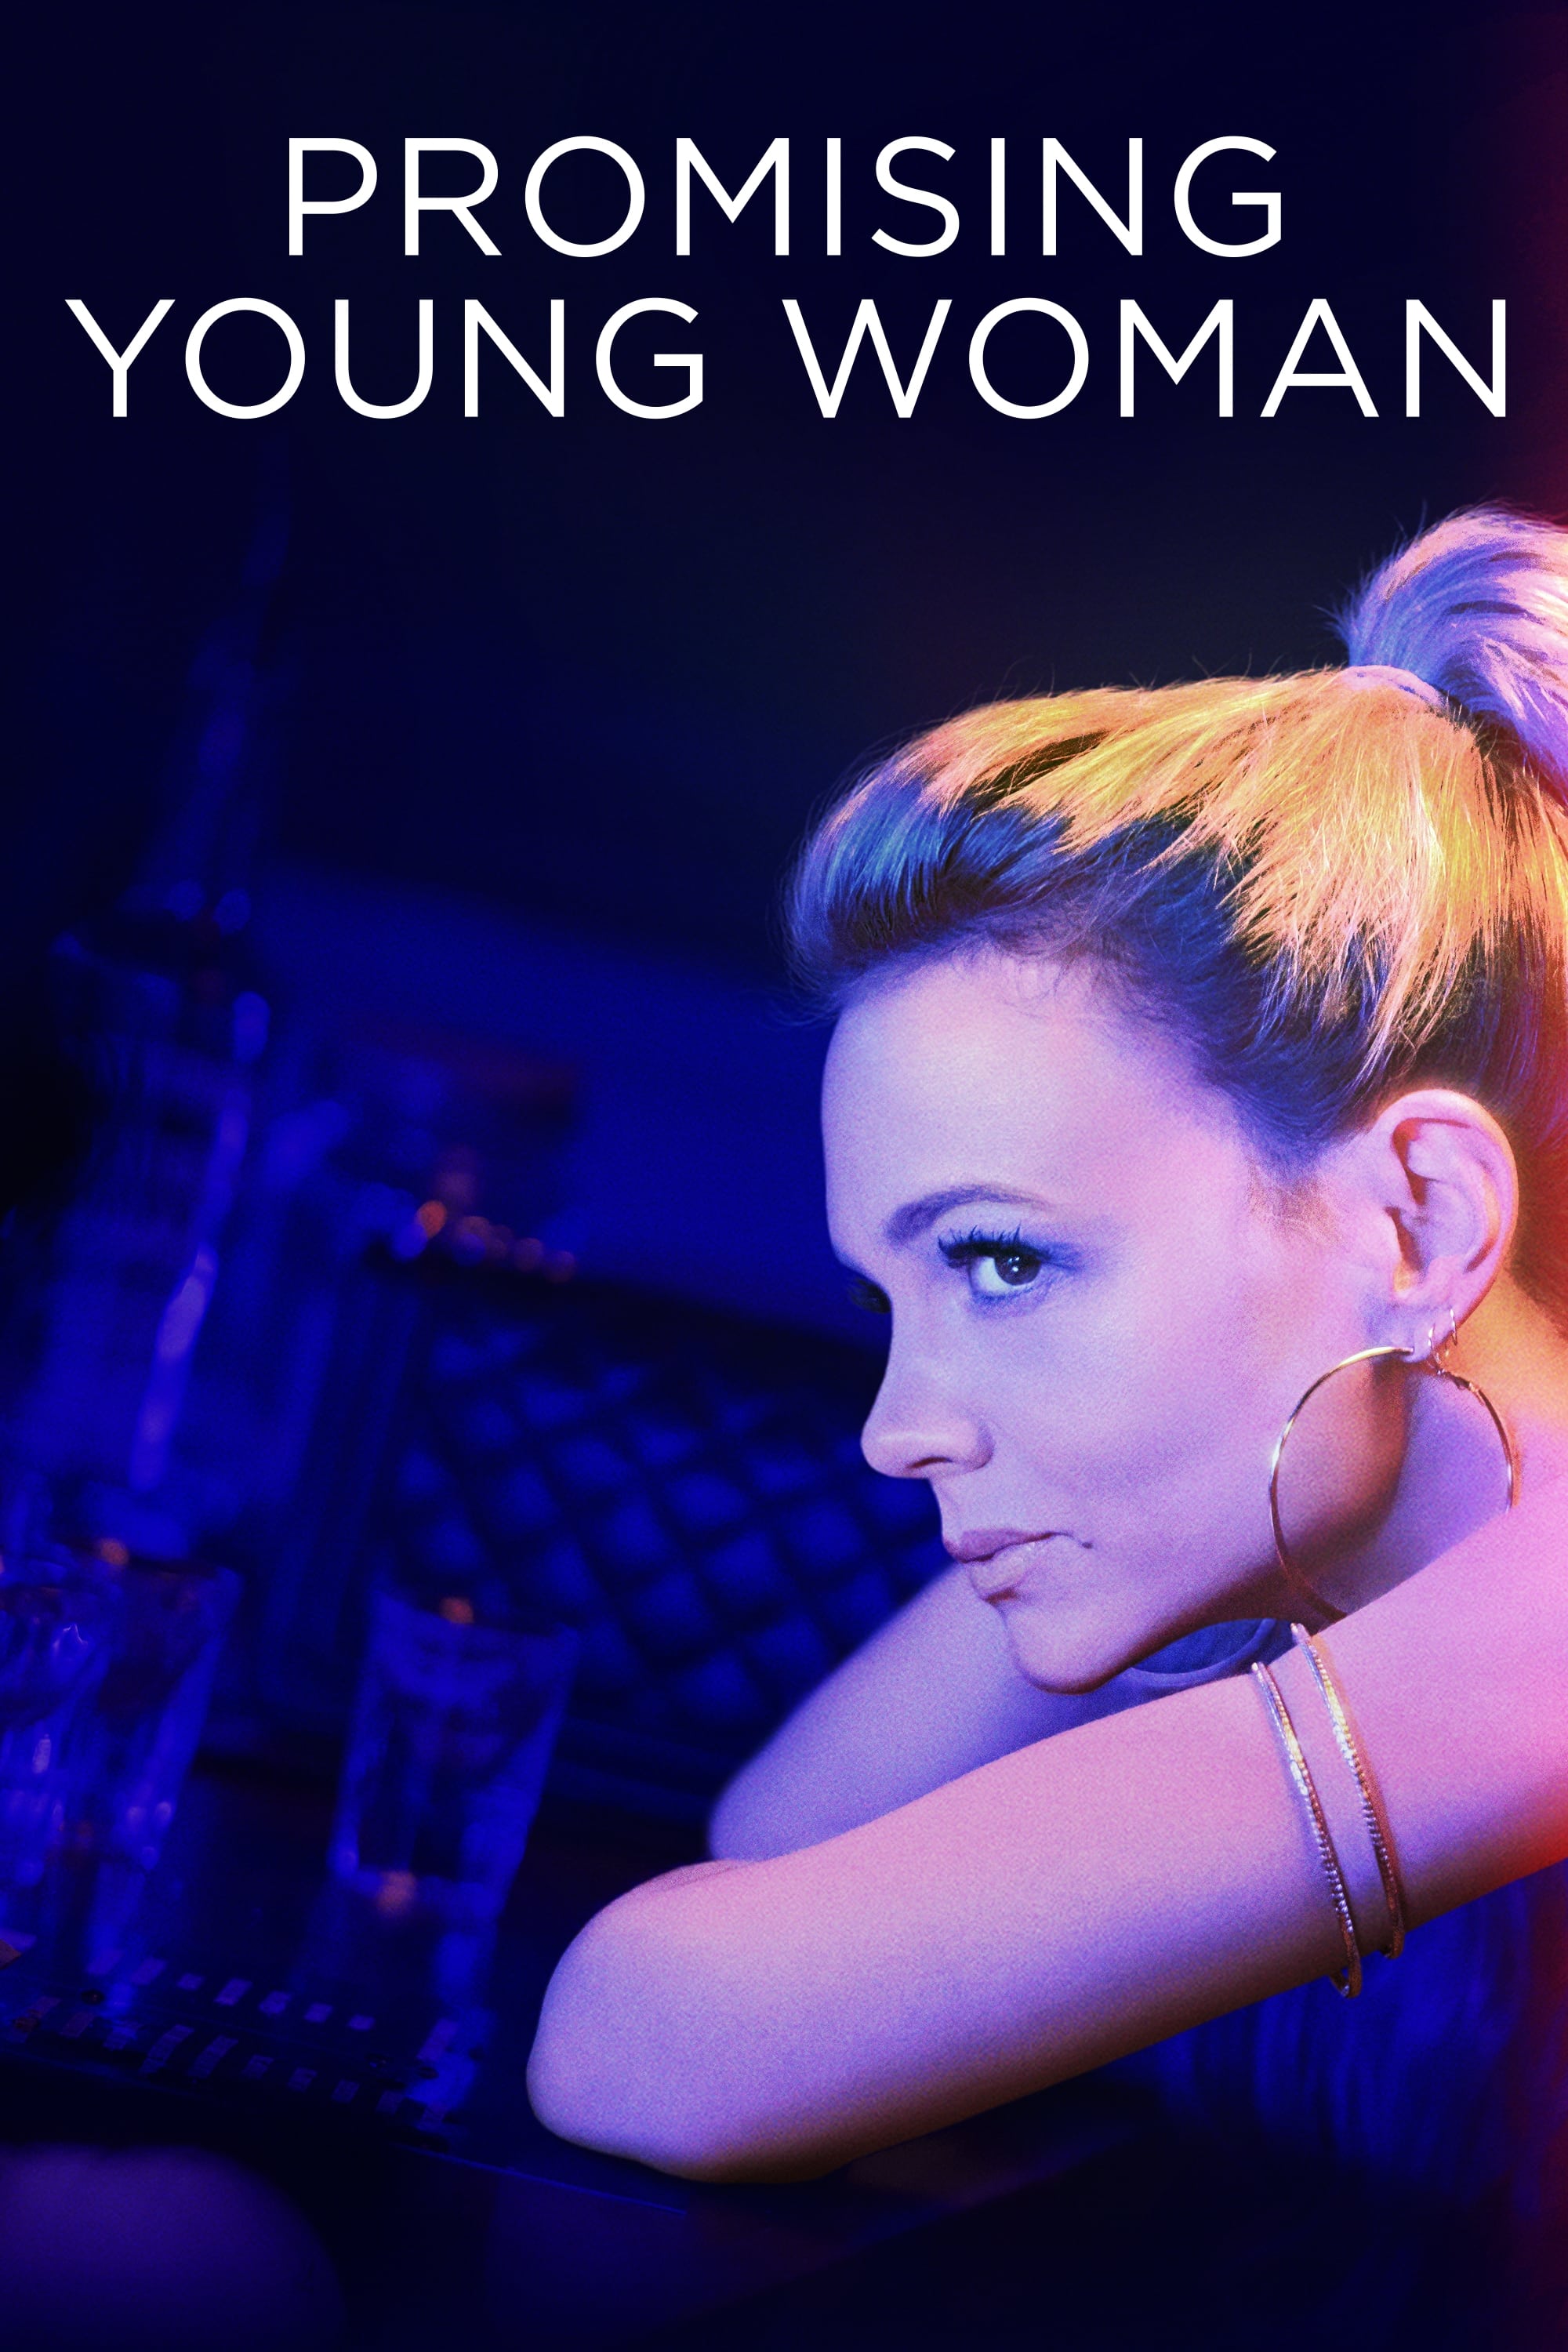 Promising Young Woman cover art